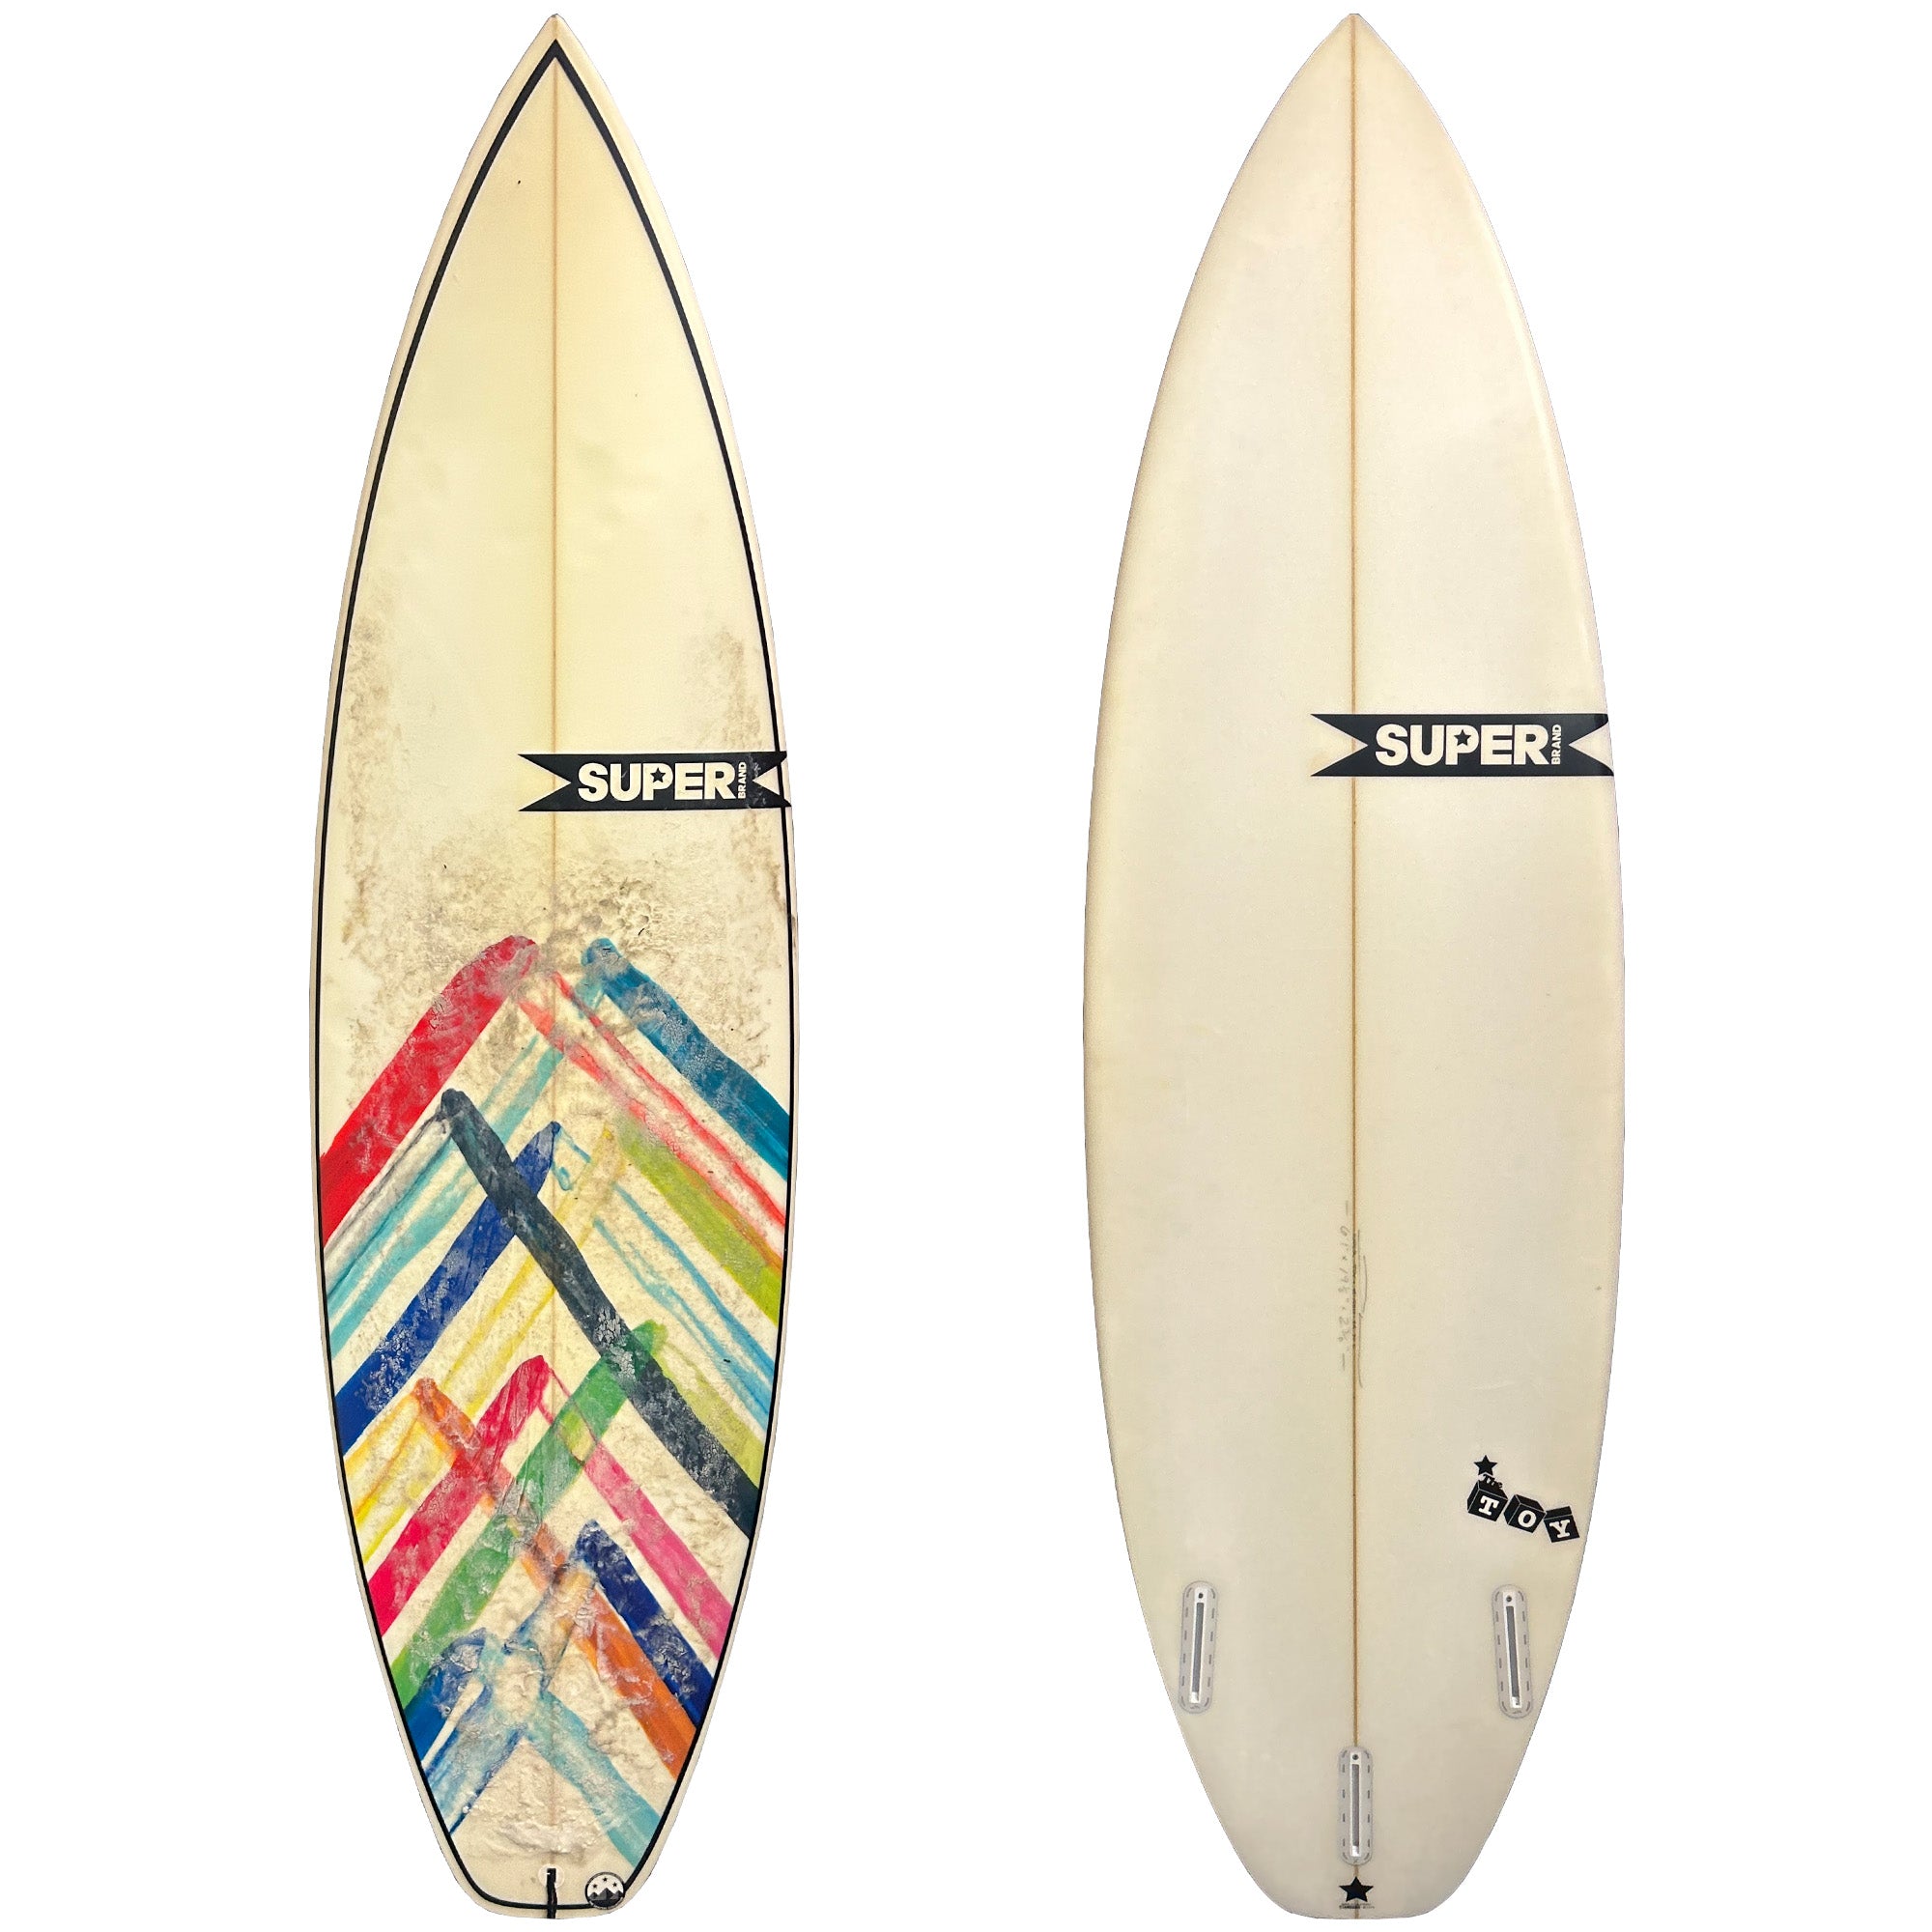 Super Brand Toy 6'1 Consignment Surfboard